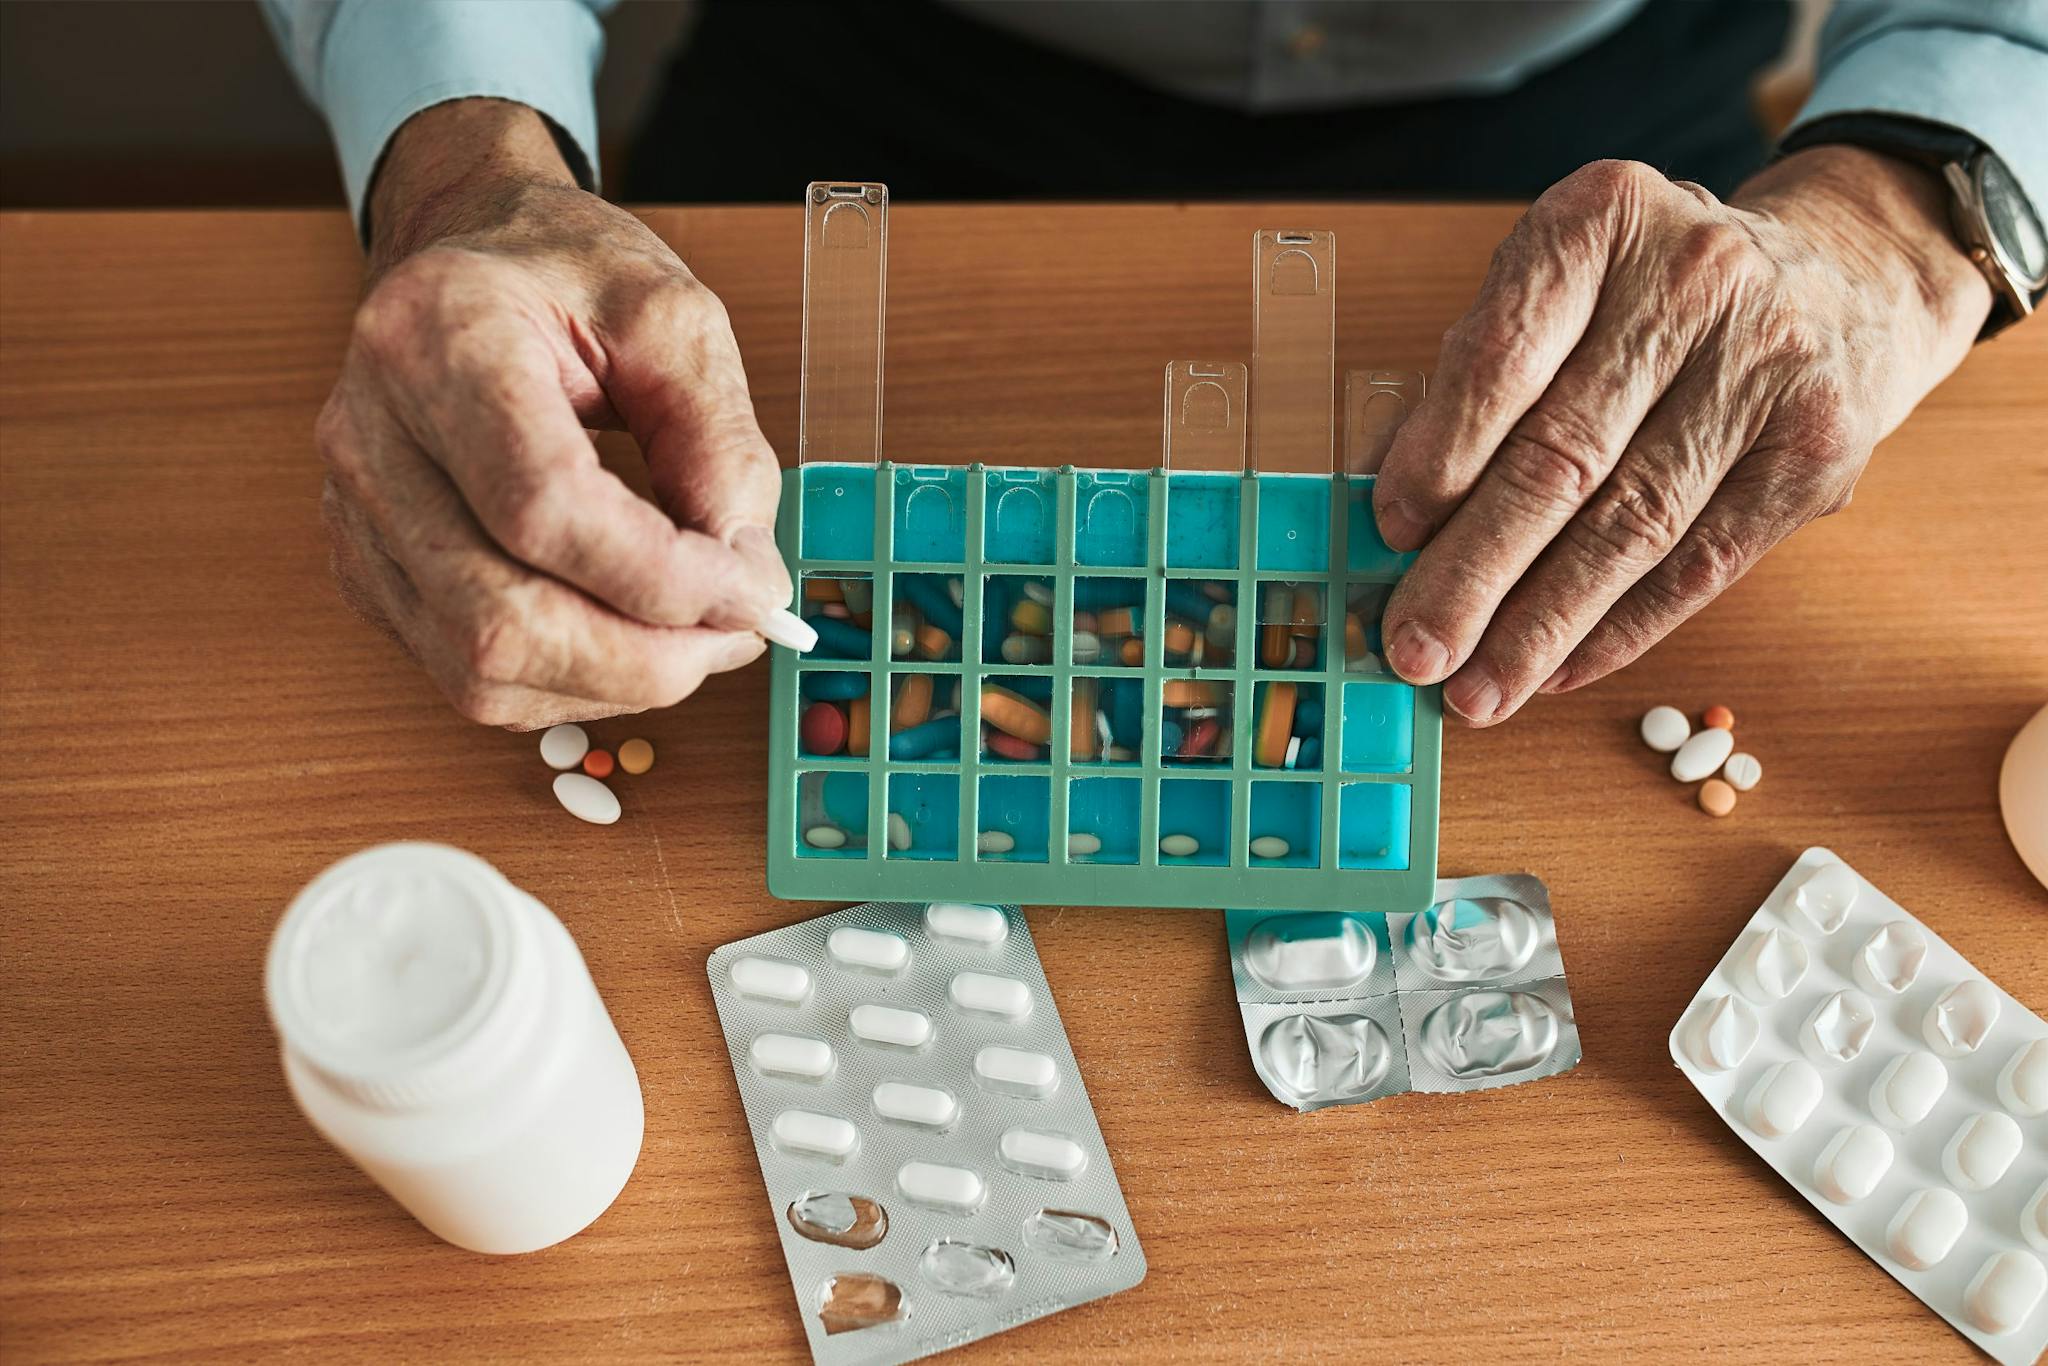 Managing medications and polypharmacy in aging adults. Discover tips for safer medication use, deprescribing, & reducing the risks of adverse effects.